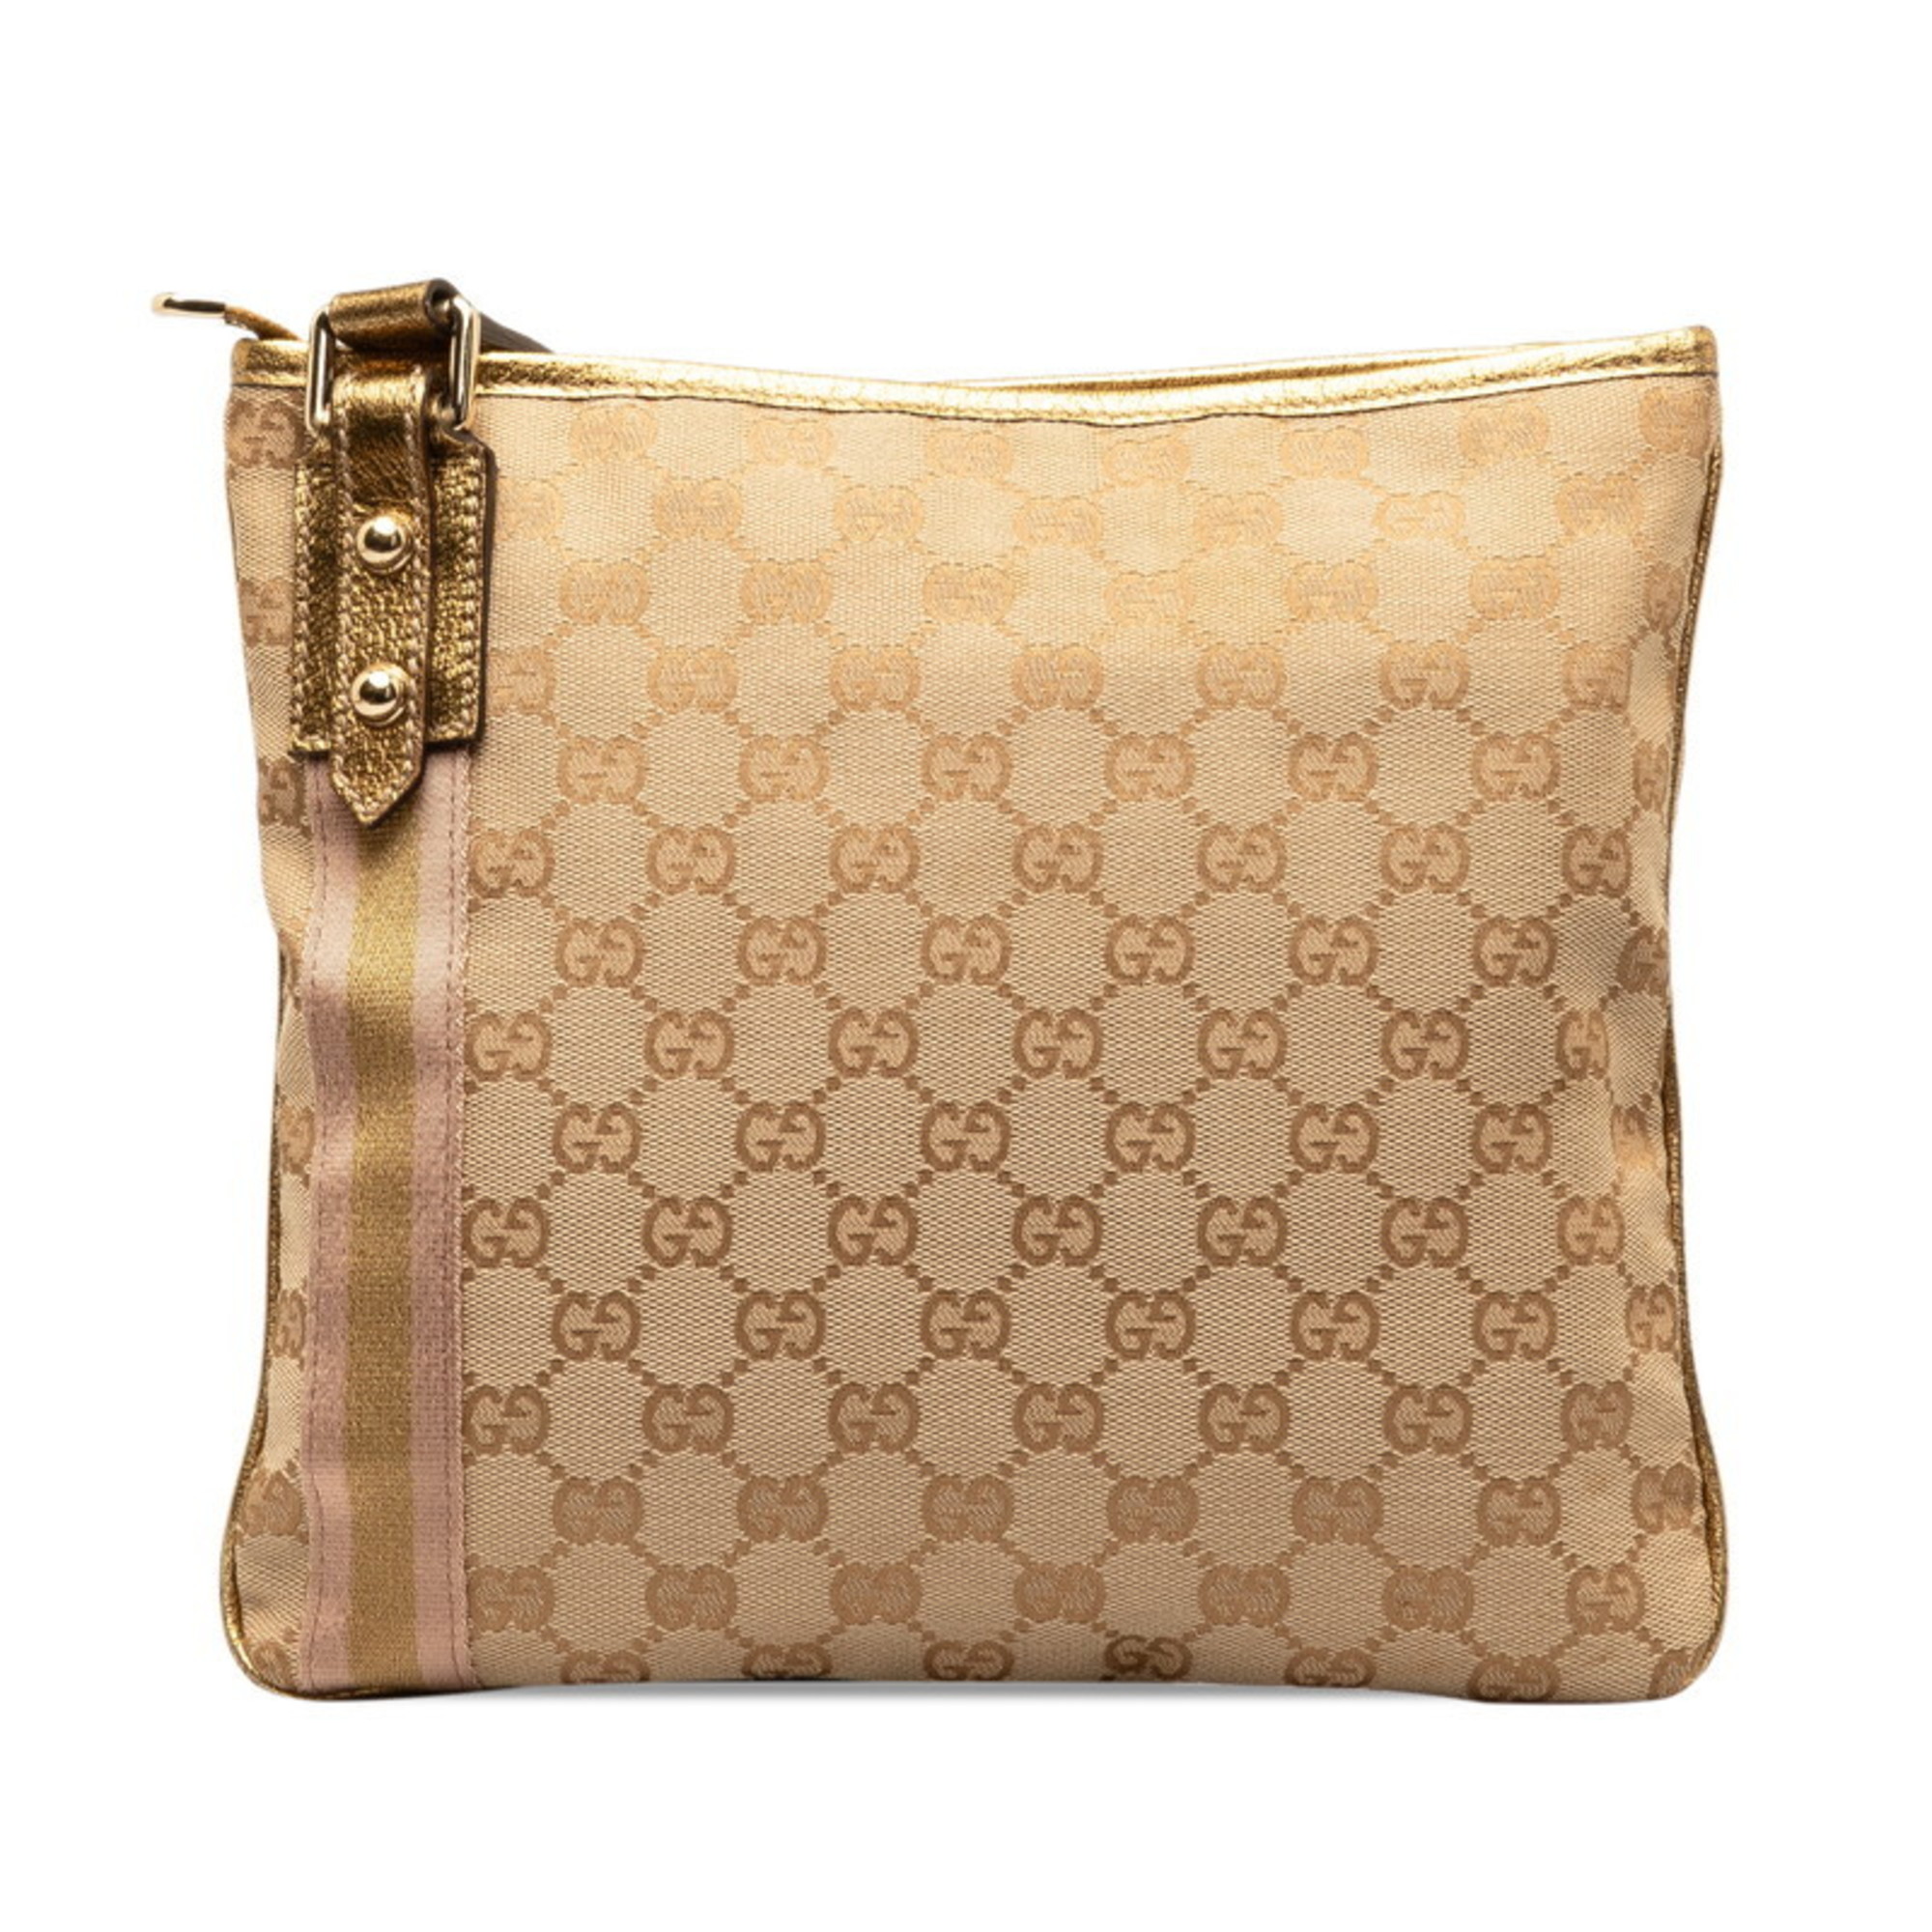 Gucci GG Canvas Shelly Shoulder Bag 144388 Beige Gold Leather Women's GUCCI